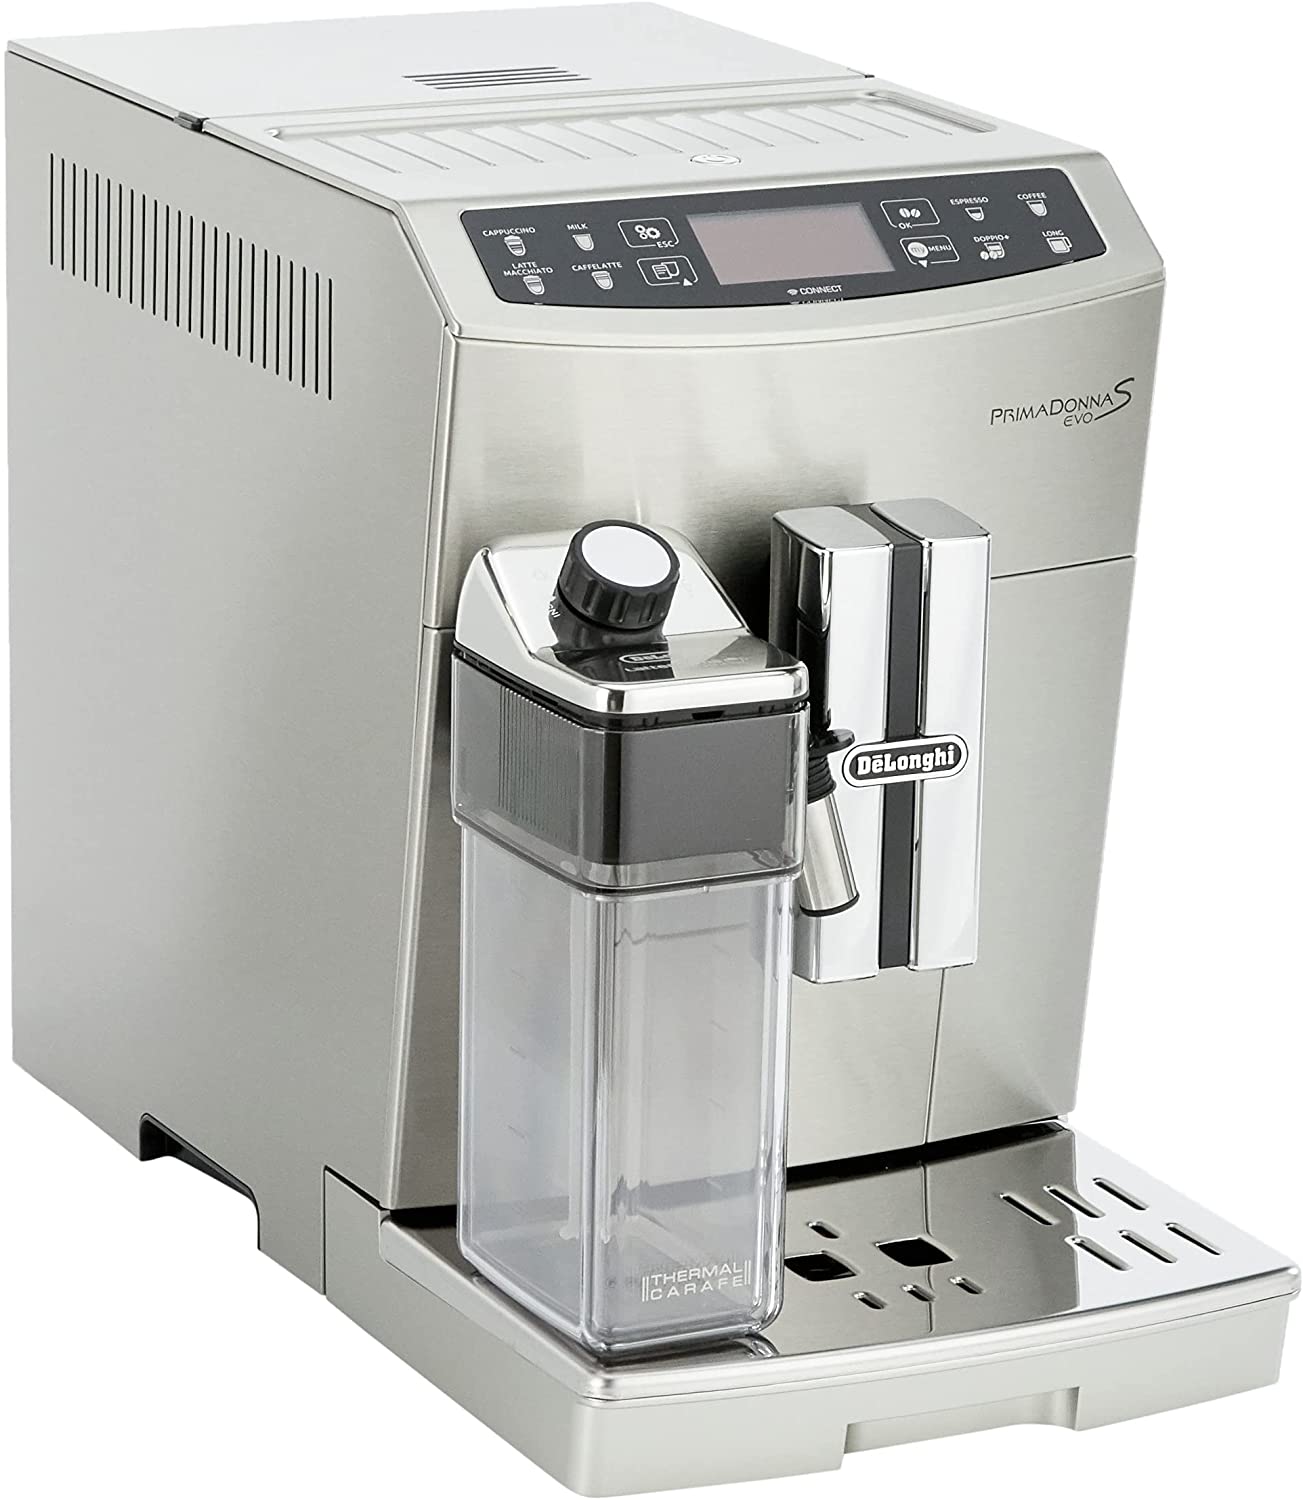 DeLonghi PrimaDonna S Evo ECAM 510.55.M Fully Automatic Coffee Machine, 1450 W, Digital Display, Integrated Milk System, App Control, Stainless Steel Case, Favourite Drinks at the Push of a Button, Silver, Coffee machine